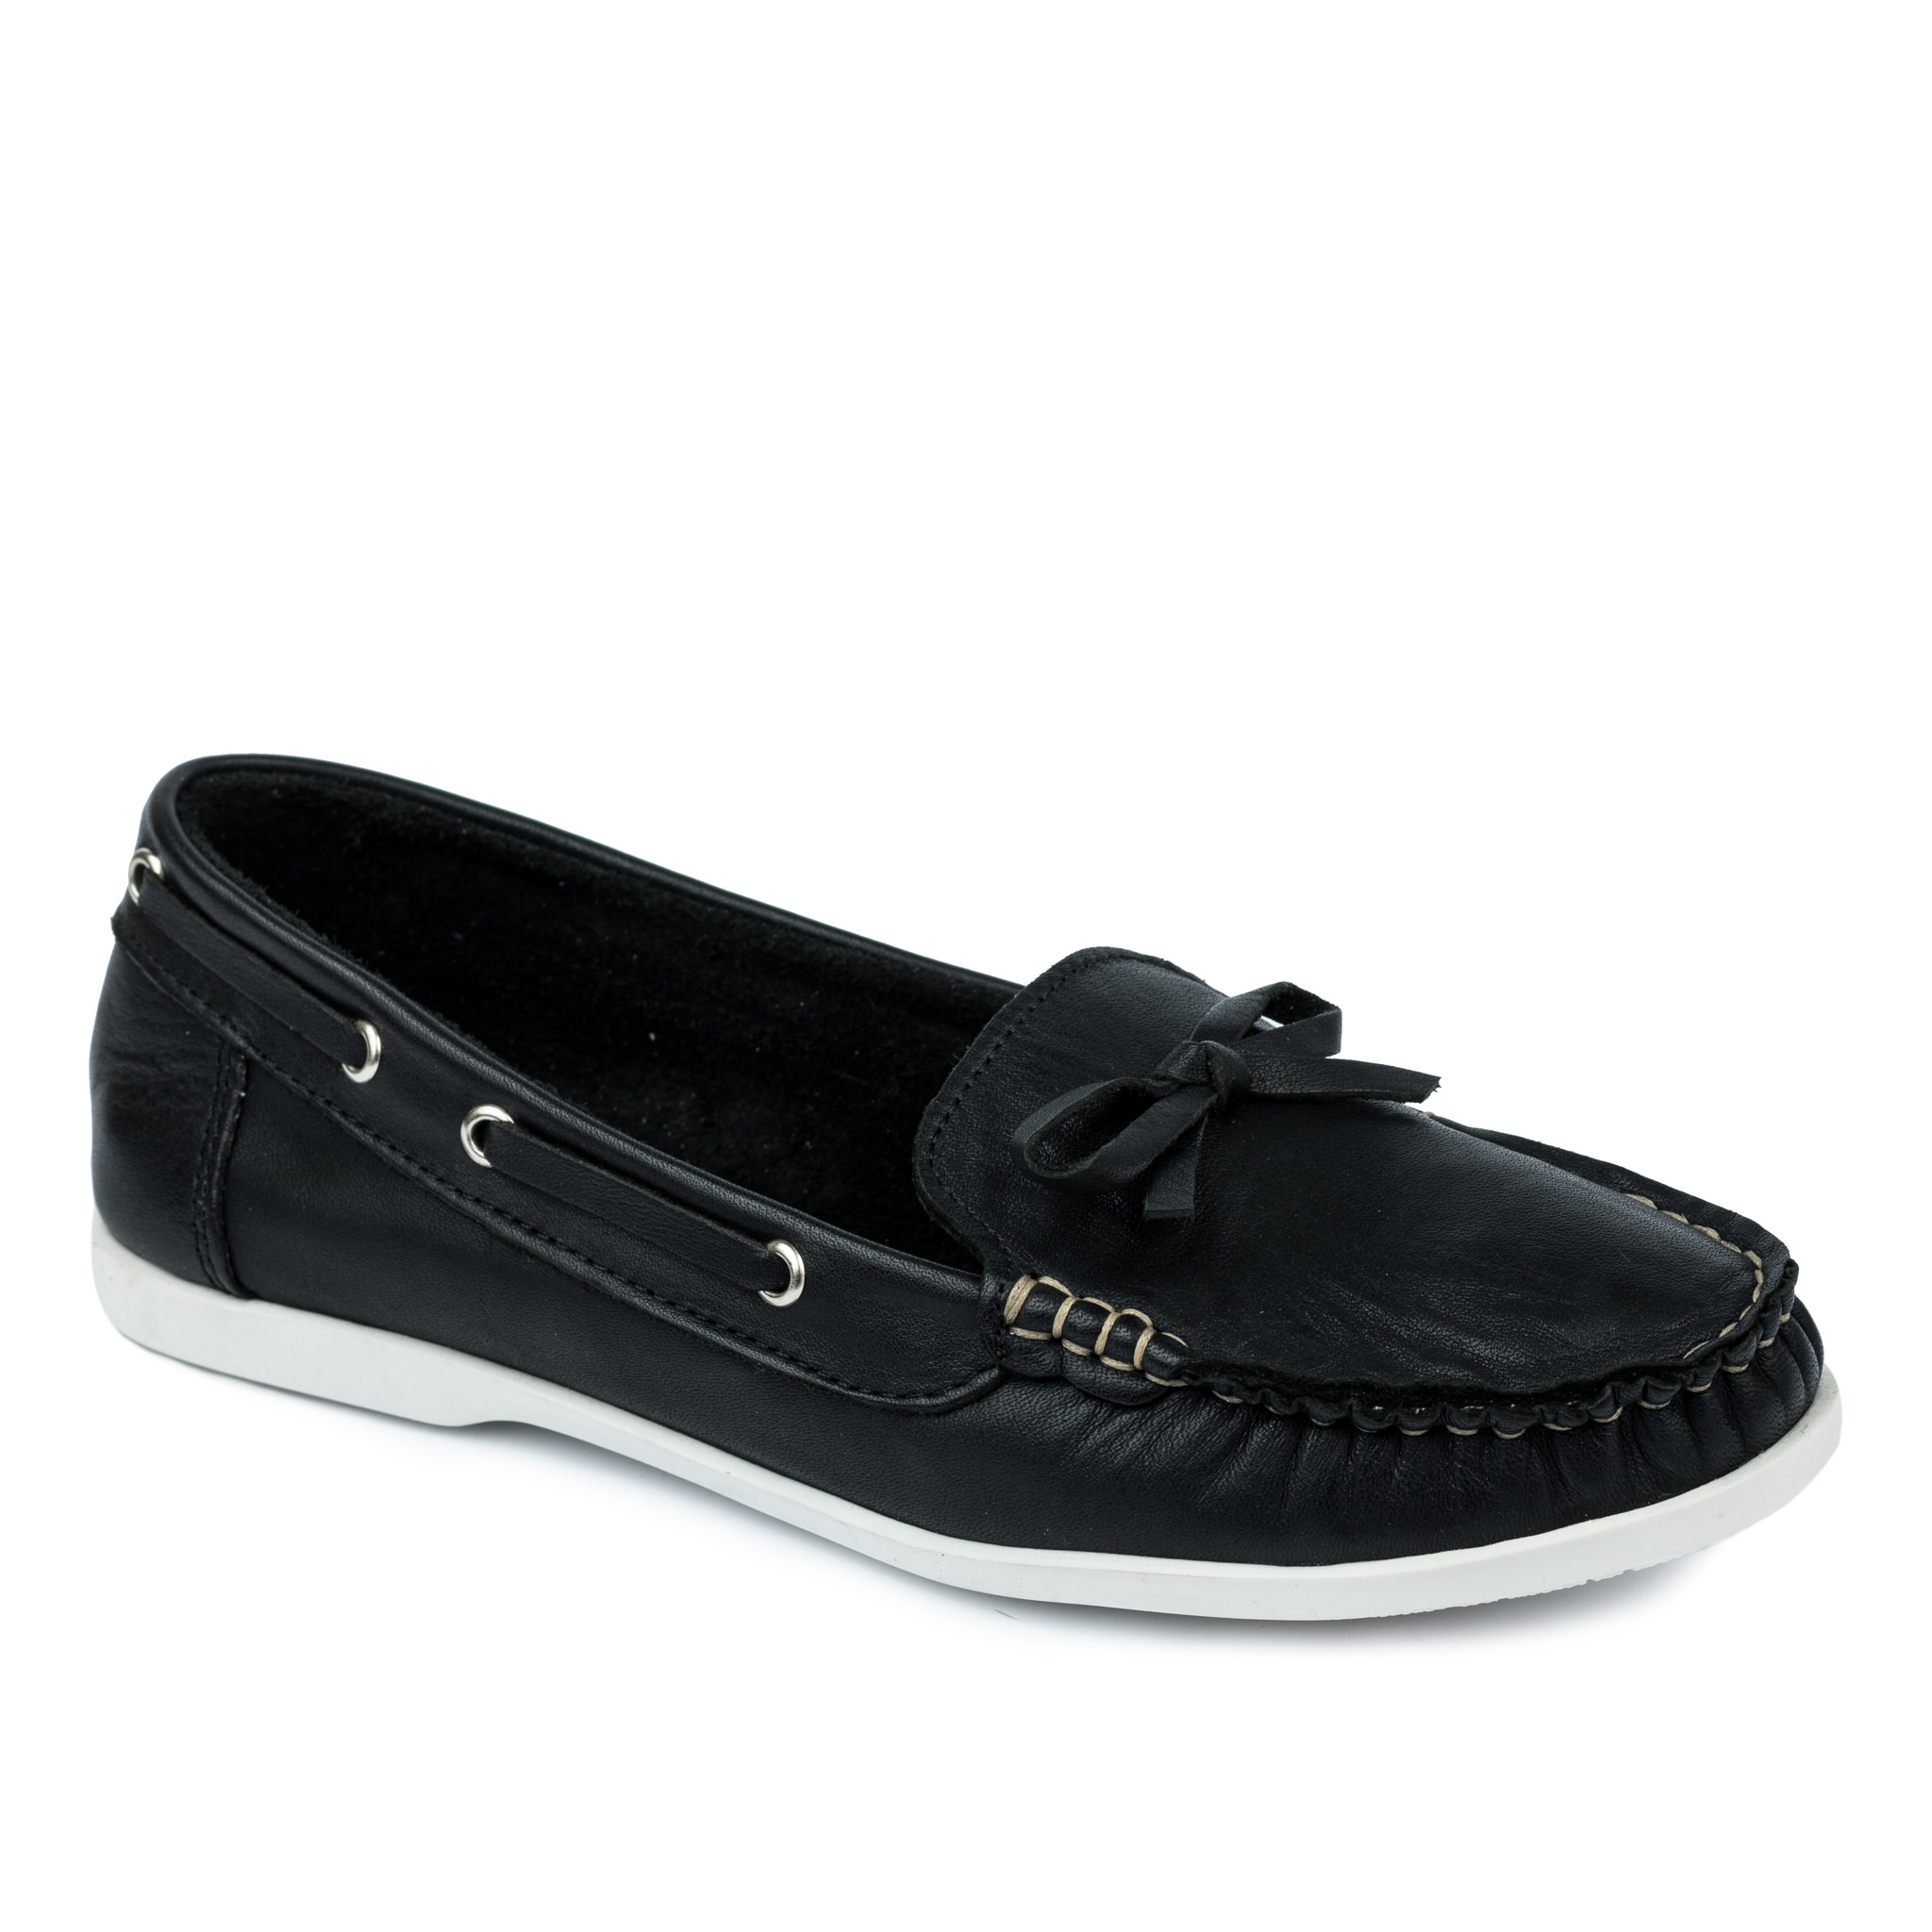 Leather moccasins A598 - BLACK